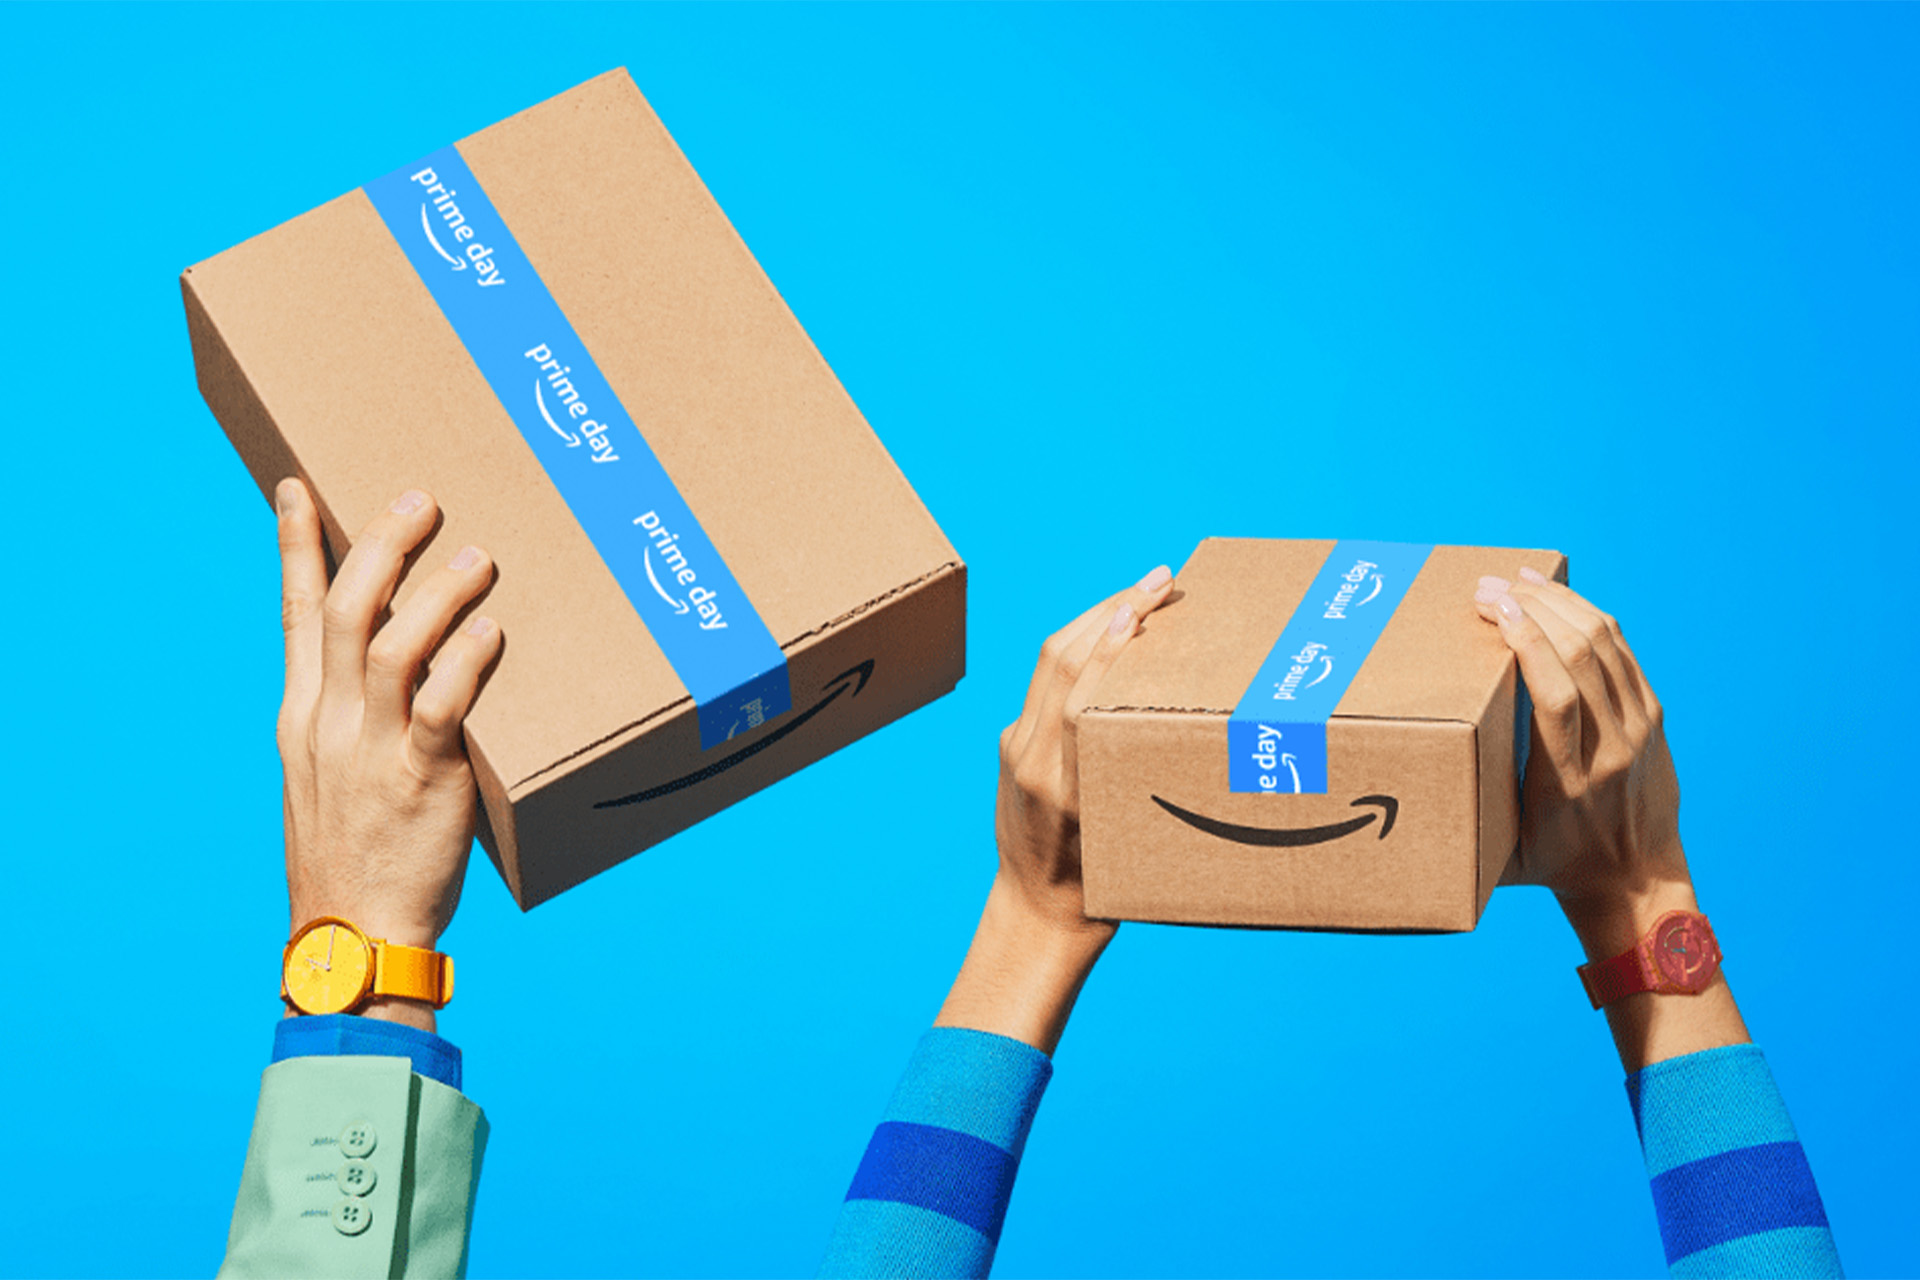 Amazon Prime Day Launches July 11 with New Deal Initiatives | HomePage News